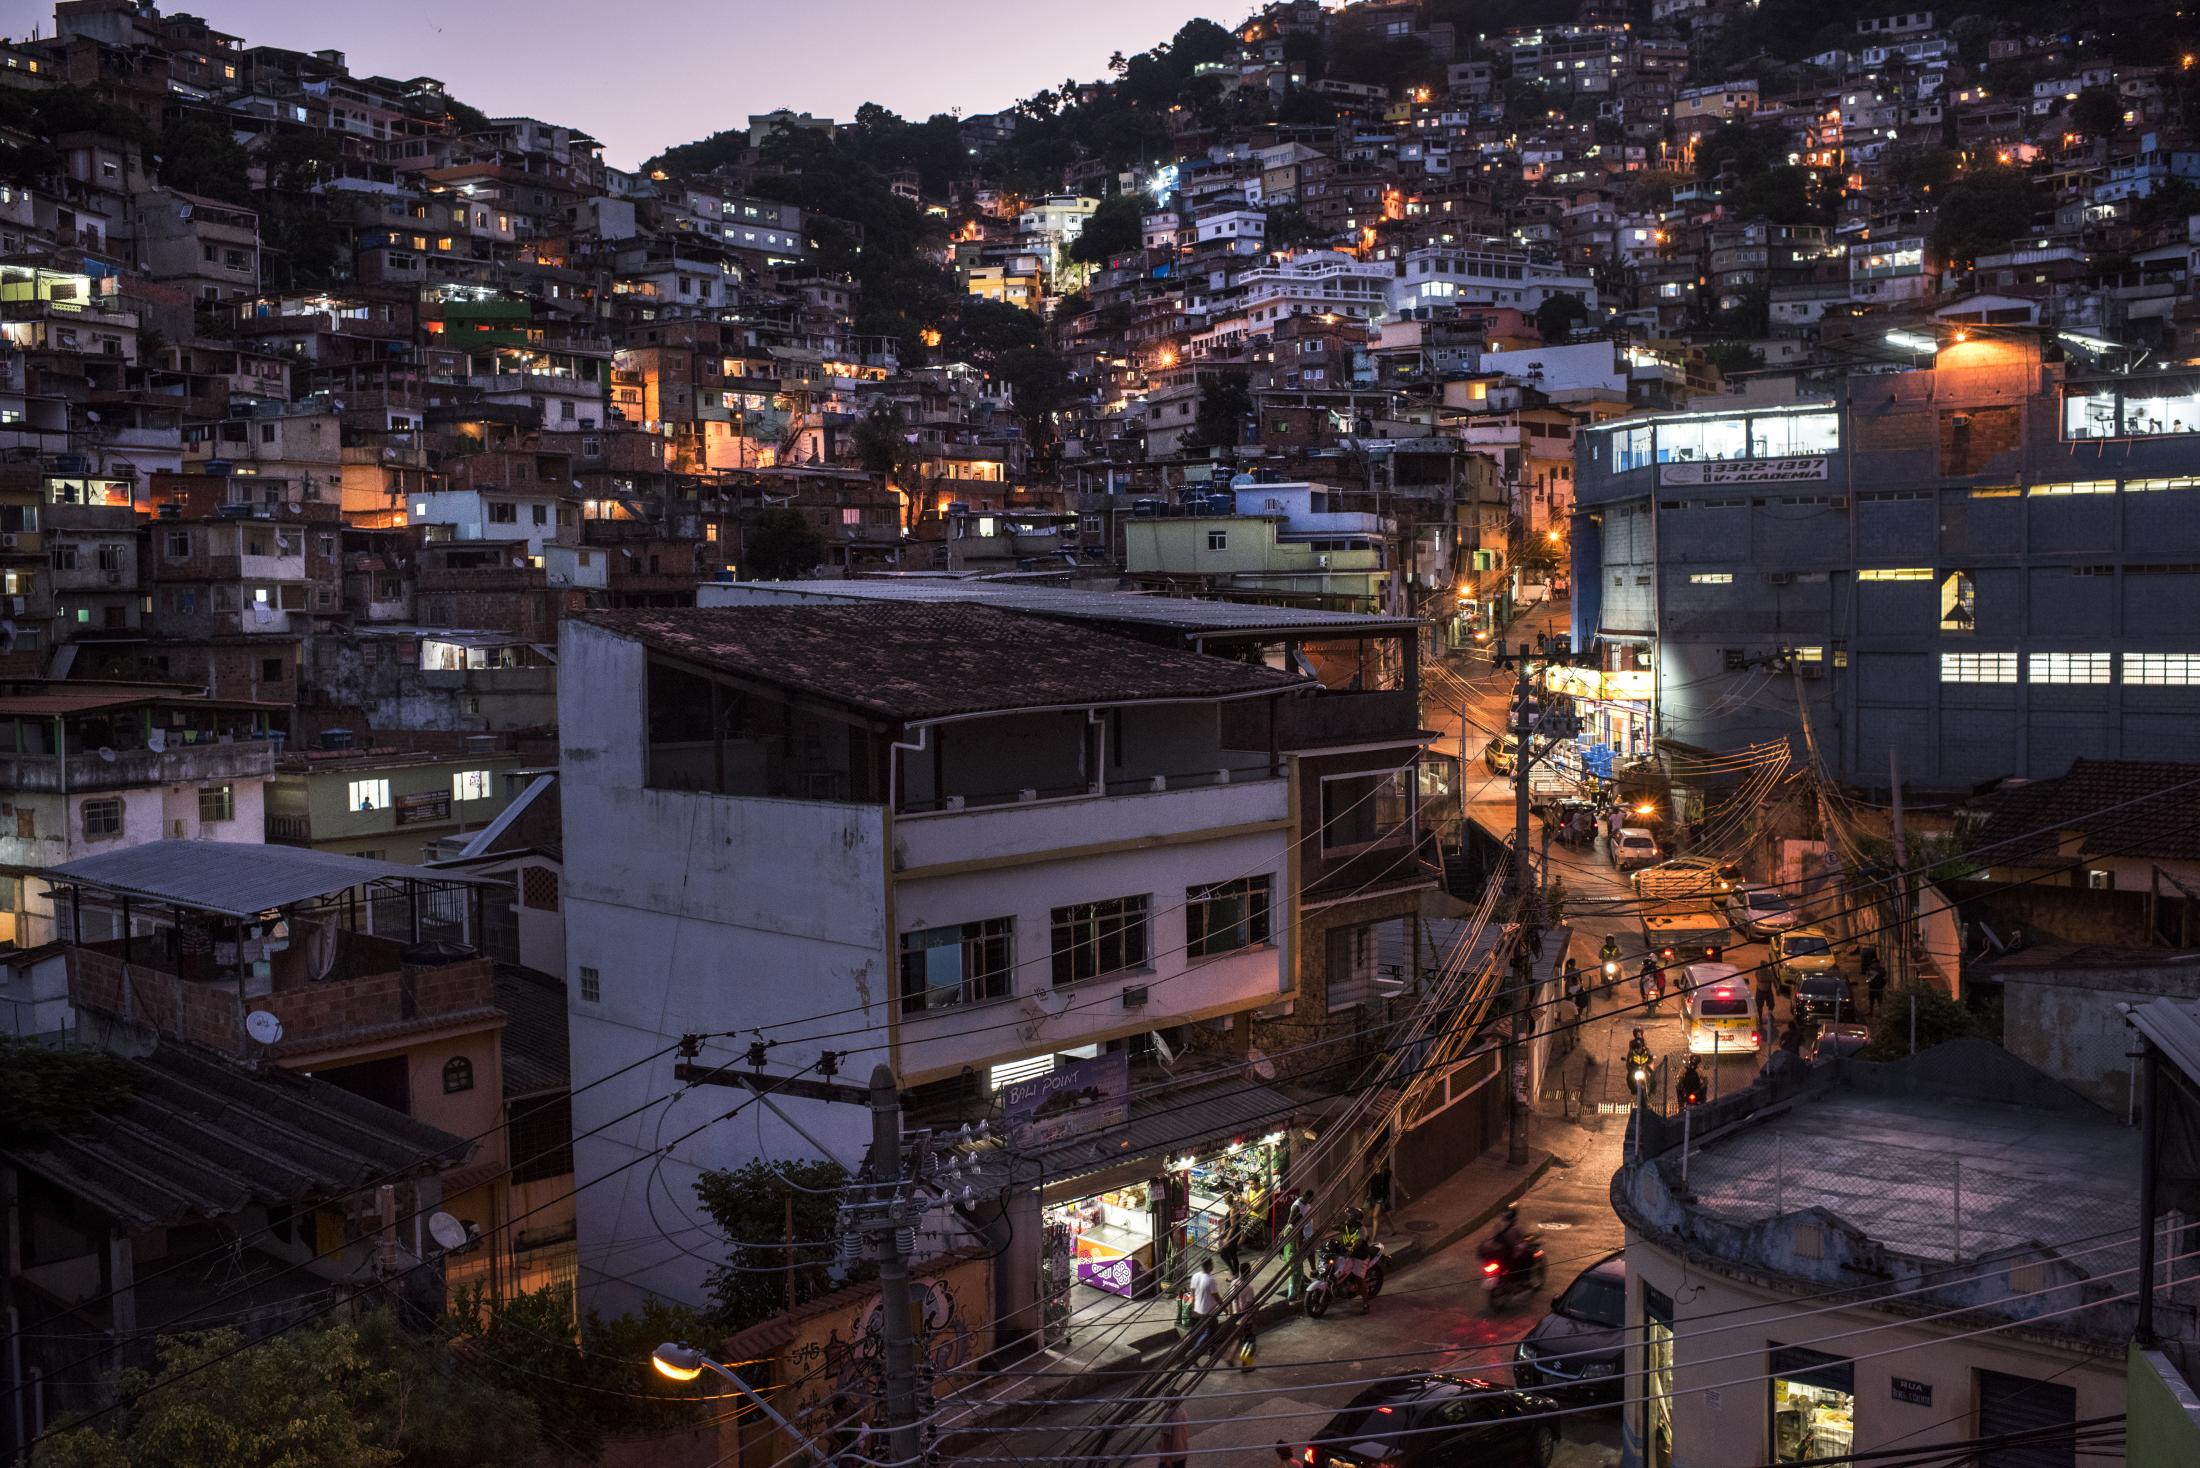 Vidigal - Early evening in Vidigal